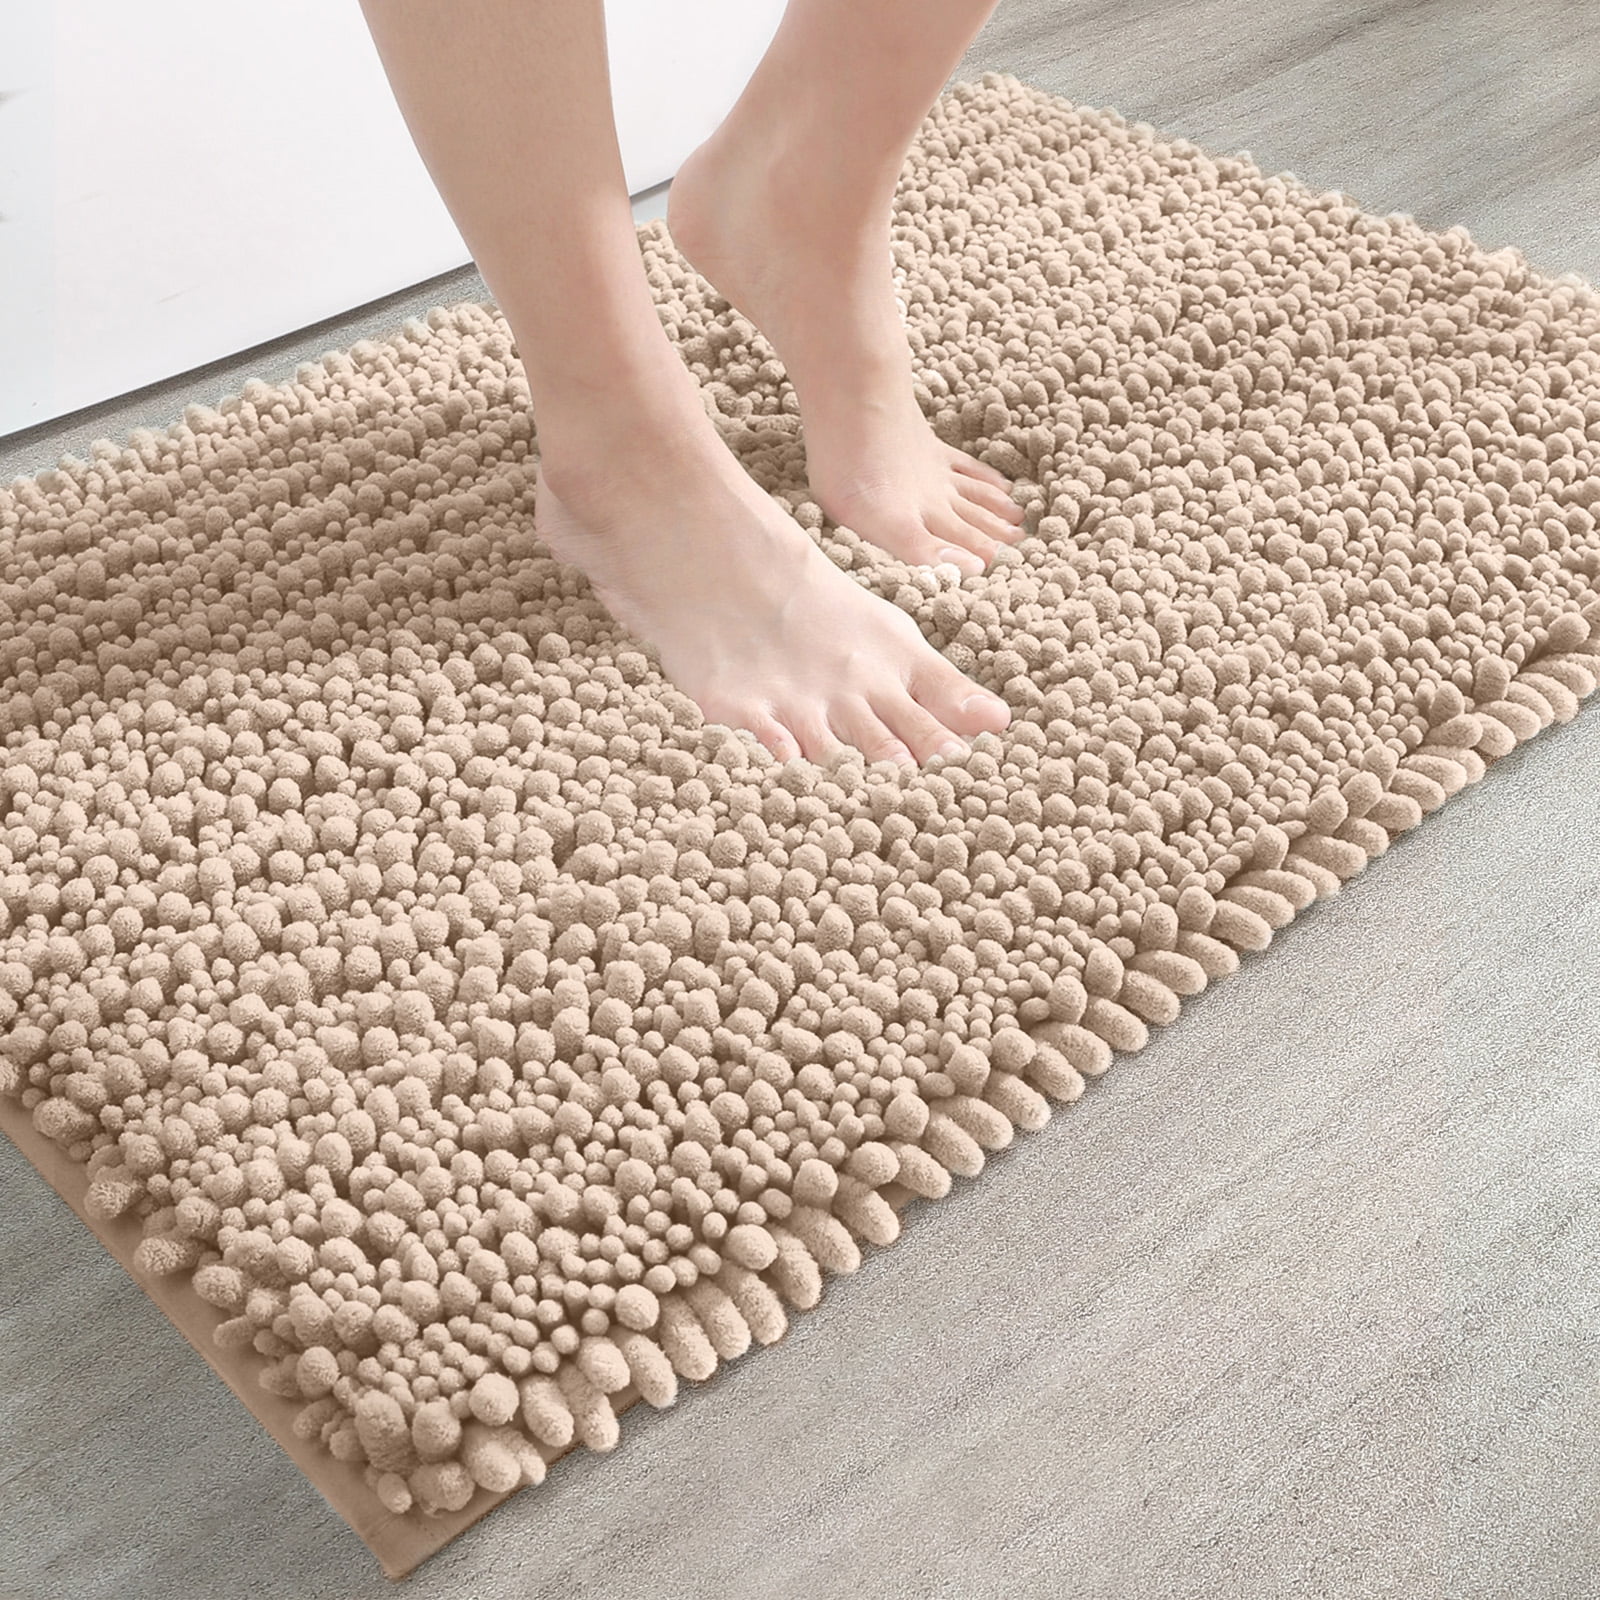 Yeaban Taupe Bathroom Rugs – Thick Chenille Bath Mats | Absorbent and  Washable Bath Rug Non-Slip, Plush and Soft Rugs for Bathroom, Kitchen,  Shower